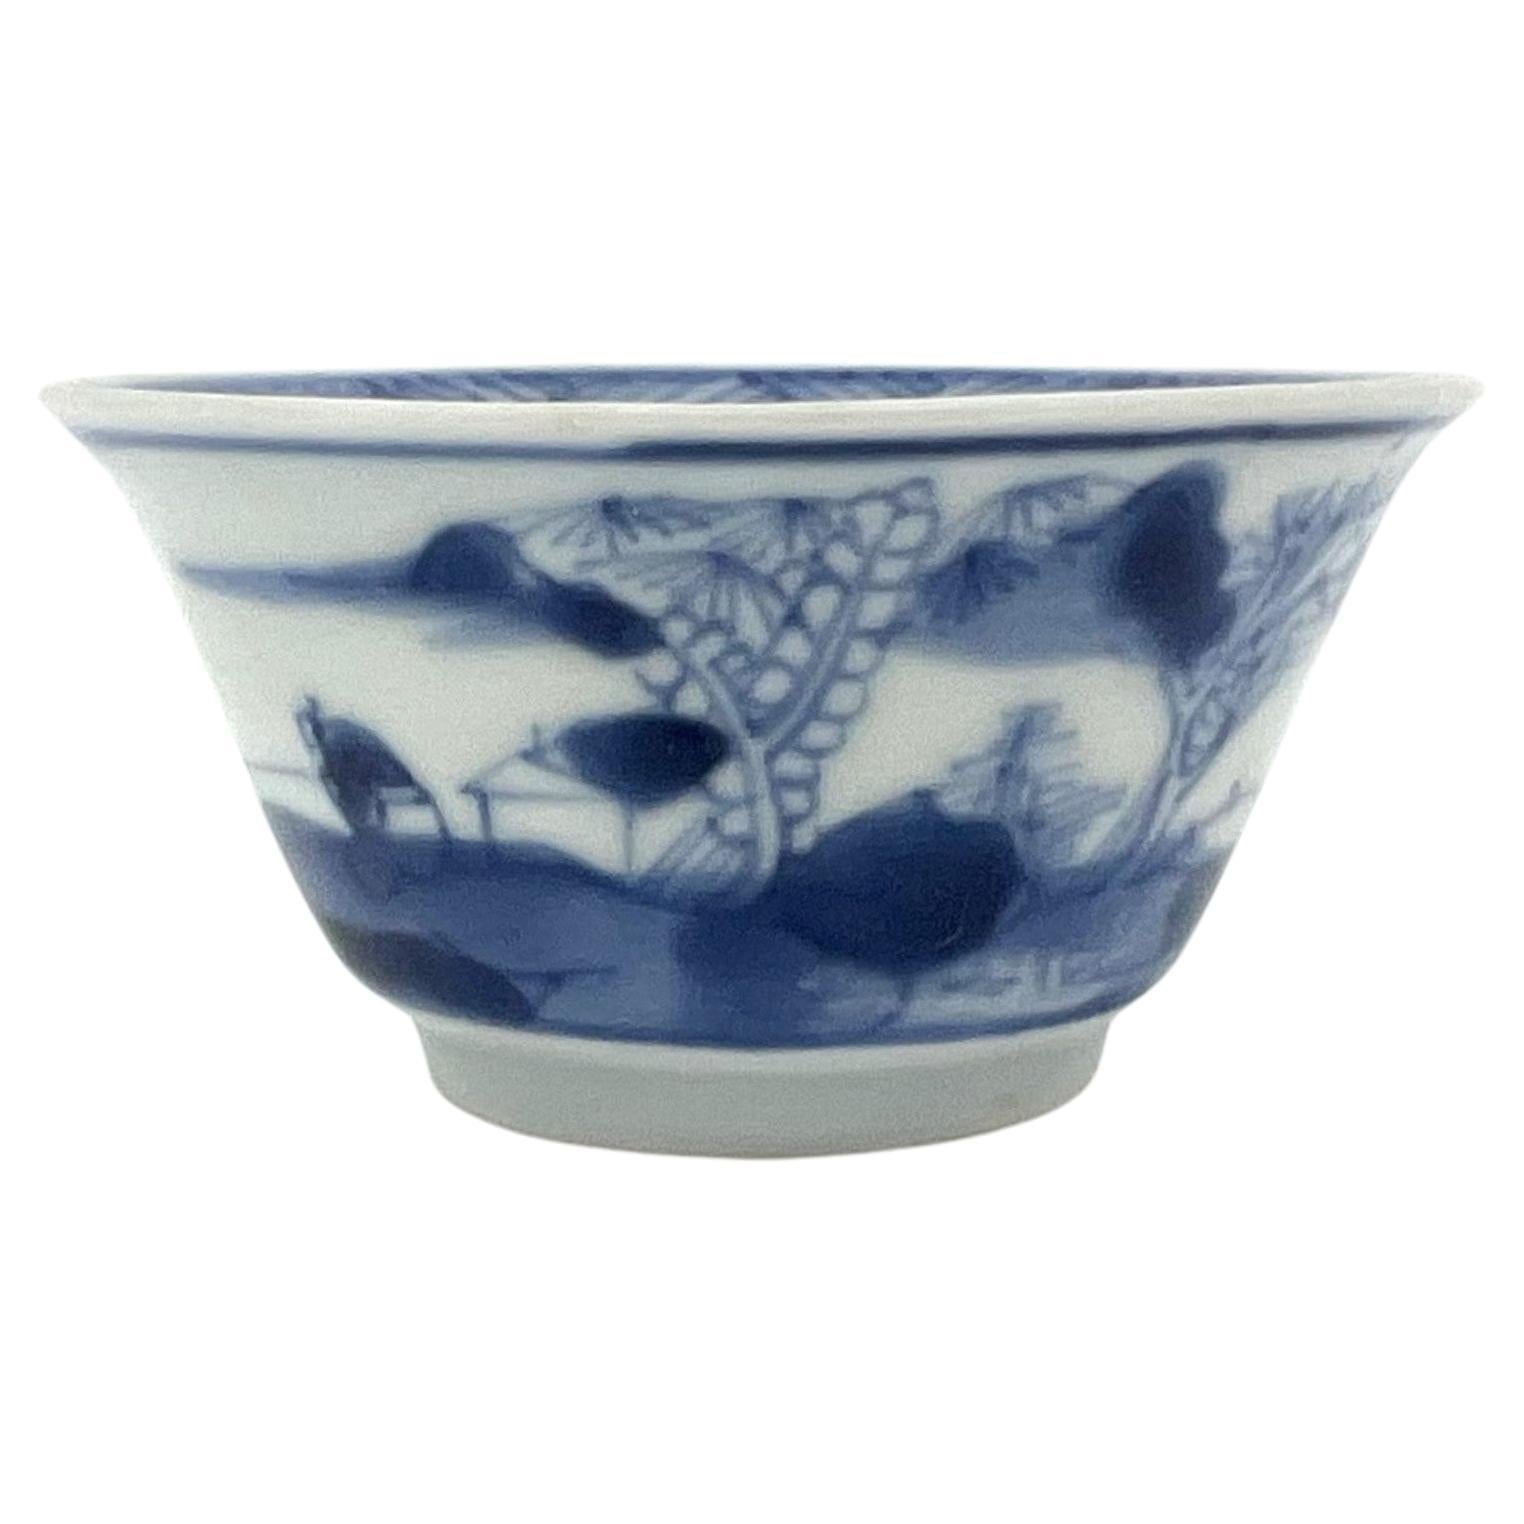 Riverscape Blue and White Teabowl, Circa 1725, Qing Dynasty, Yongzheng Reign. For Sale